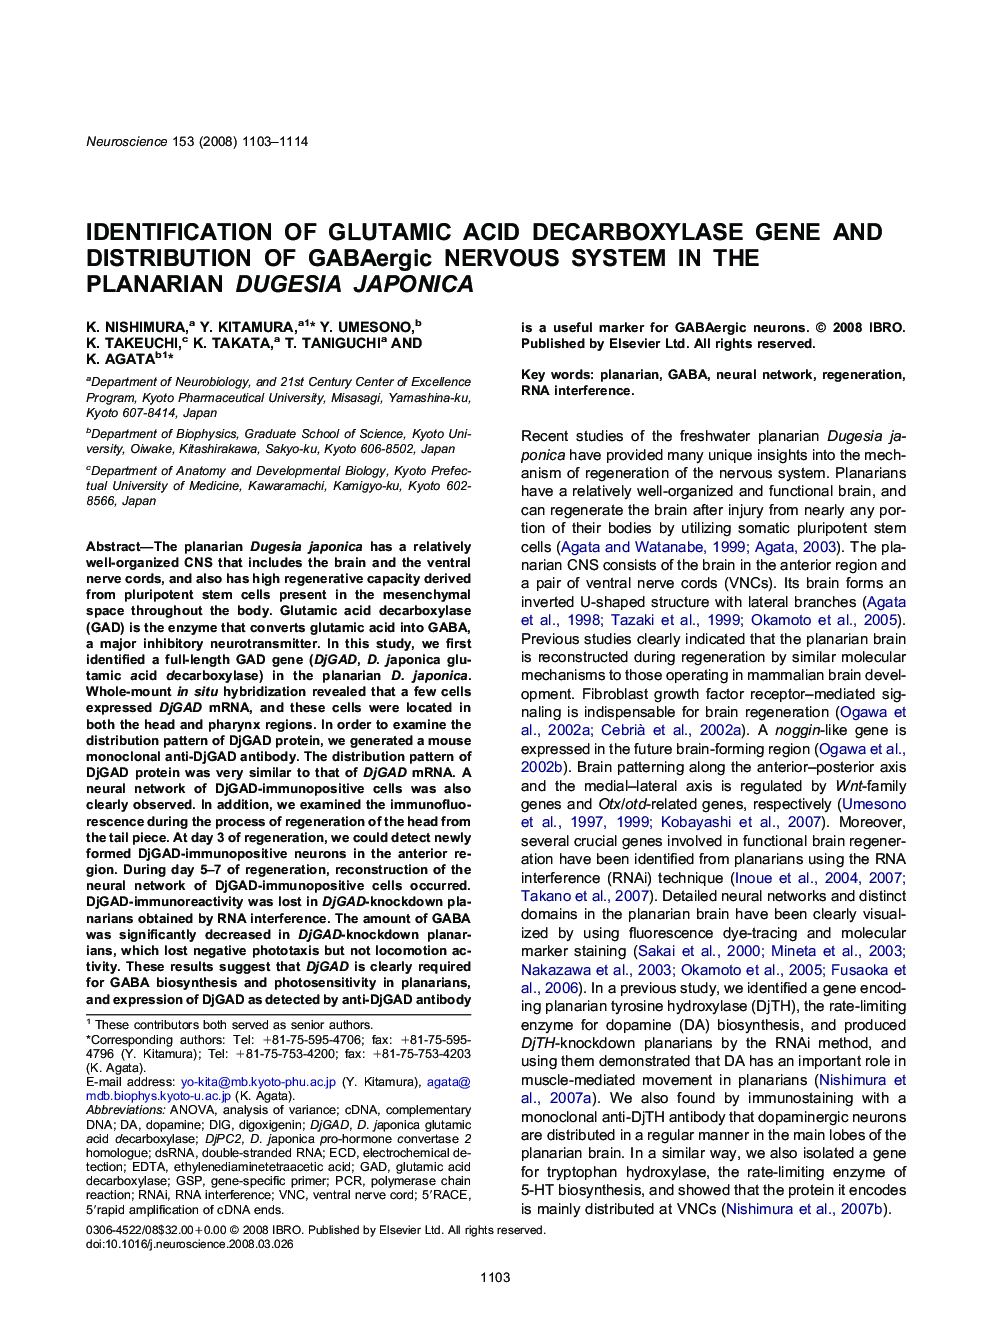 Identification of glutamic acid decarboxylase gene and distribution of GABAergic nervous system in the planarian Dugesia japonica